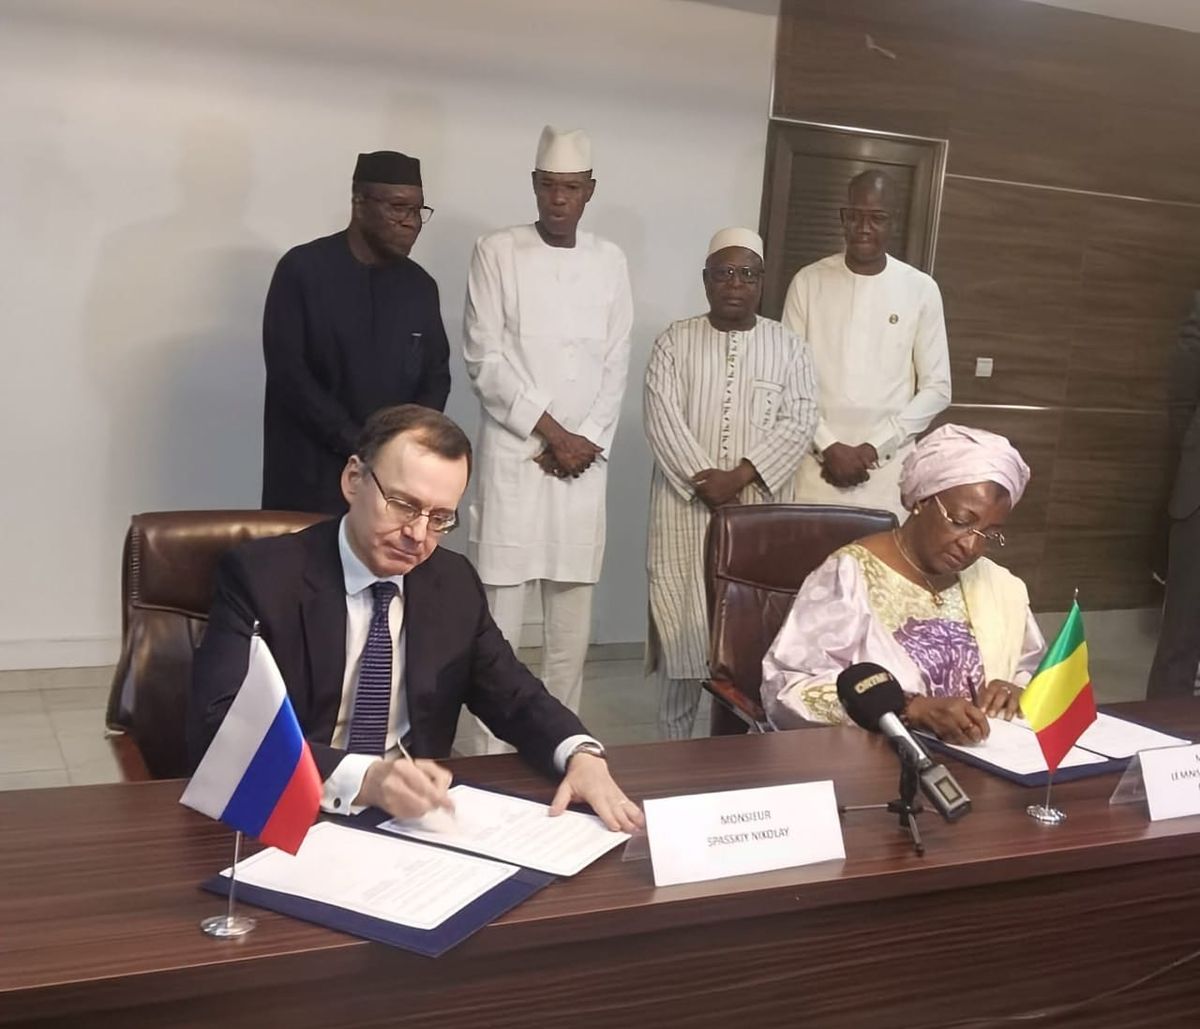 The Republic Of Mali Seeks For Nuclear Energy Infrastructure And Personnel Development